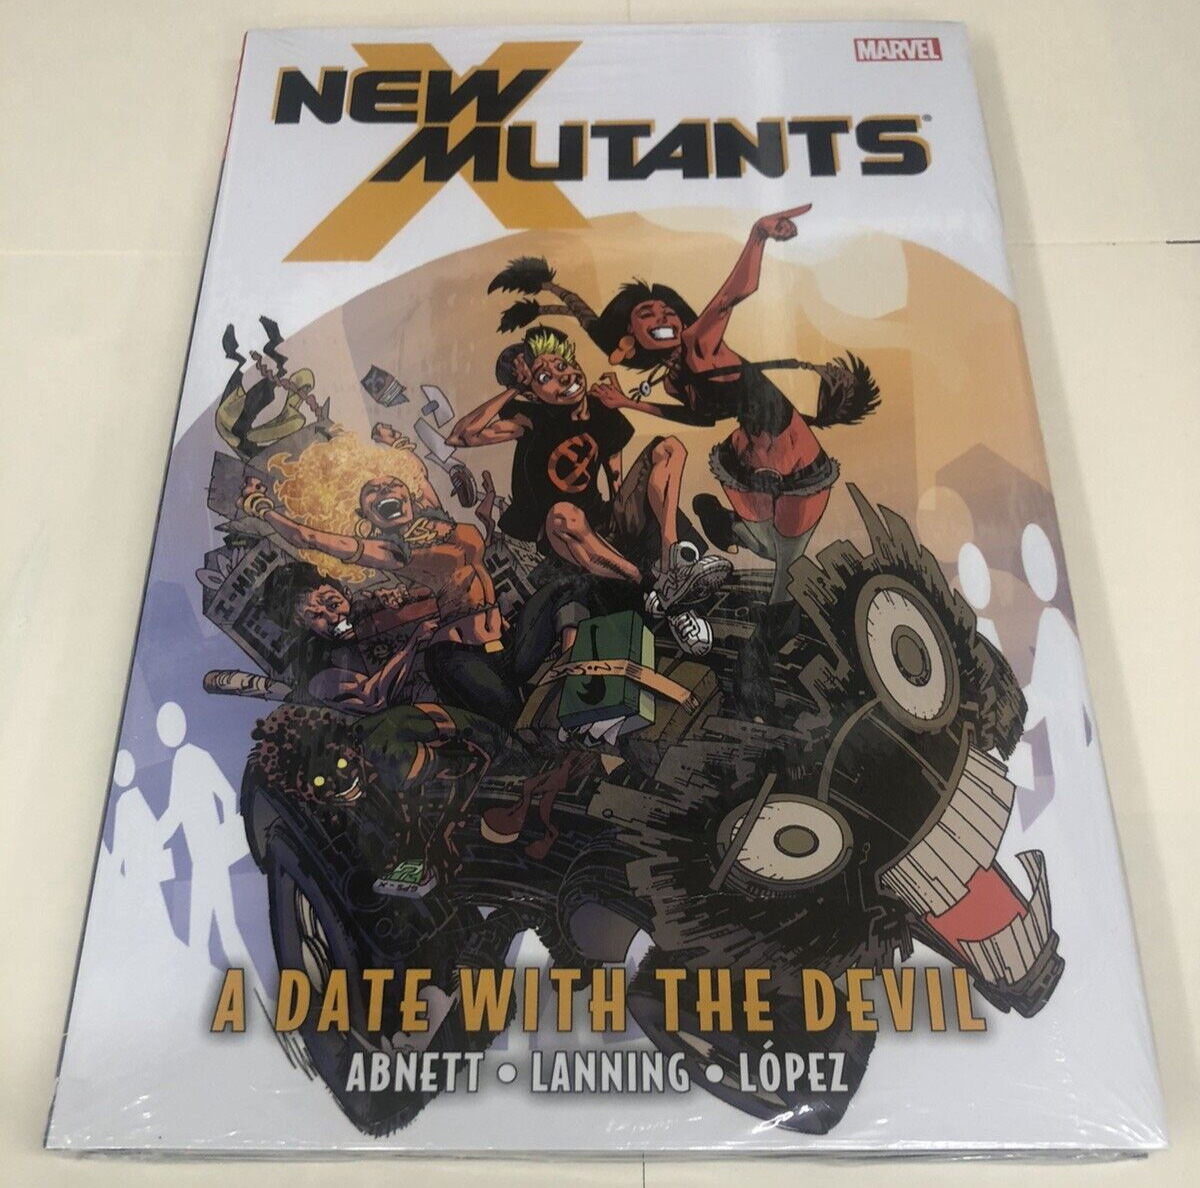 New Mutants A DATE WITH THE DEVIL Hardcover Graphic Novel Marvel 2012 New sealed